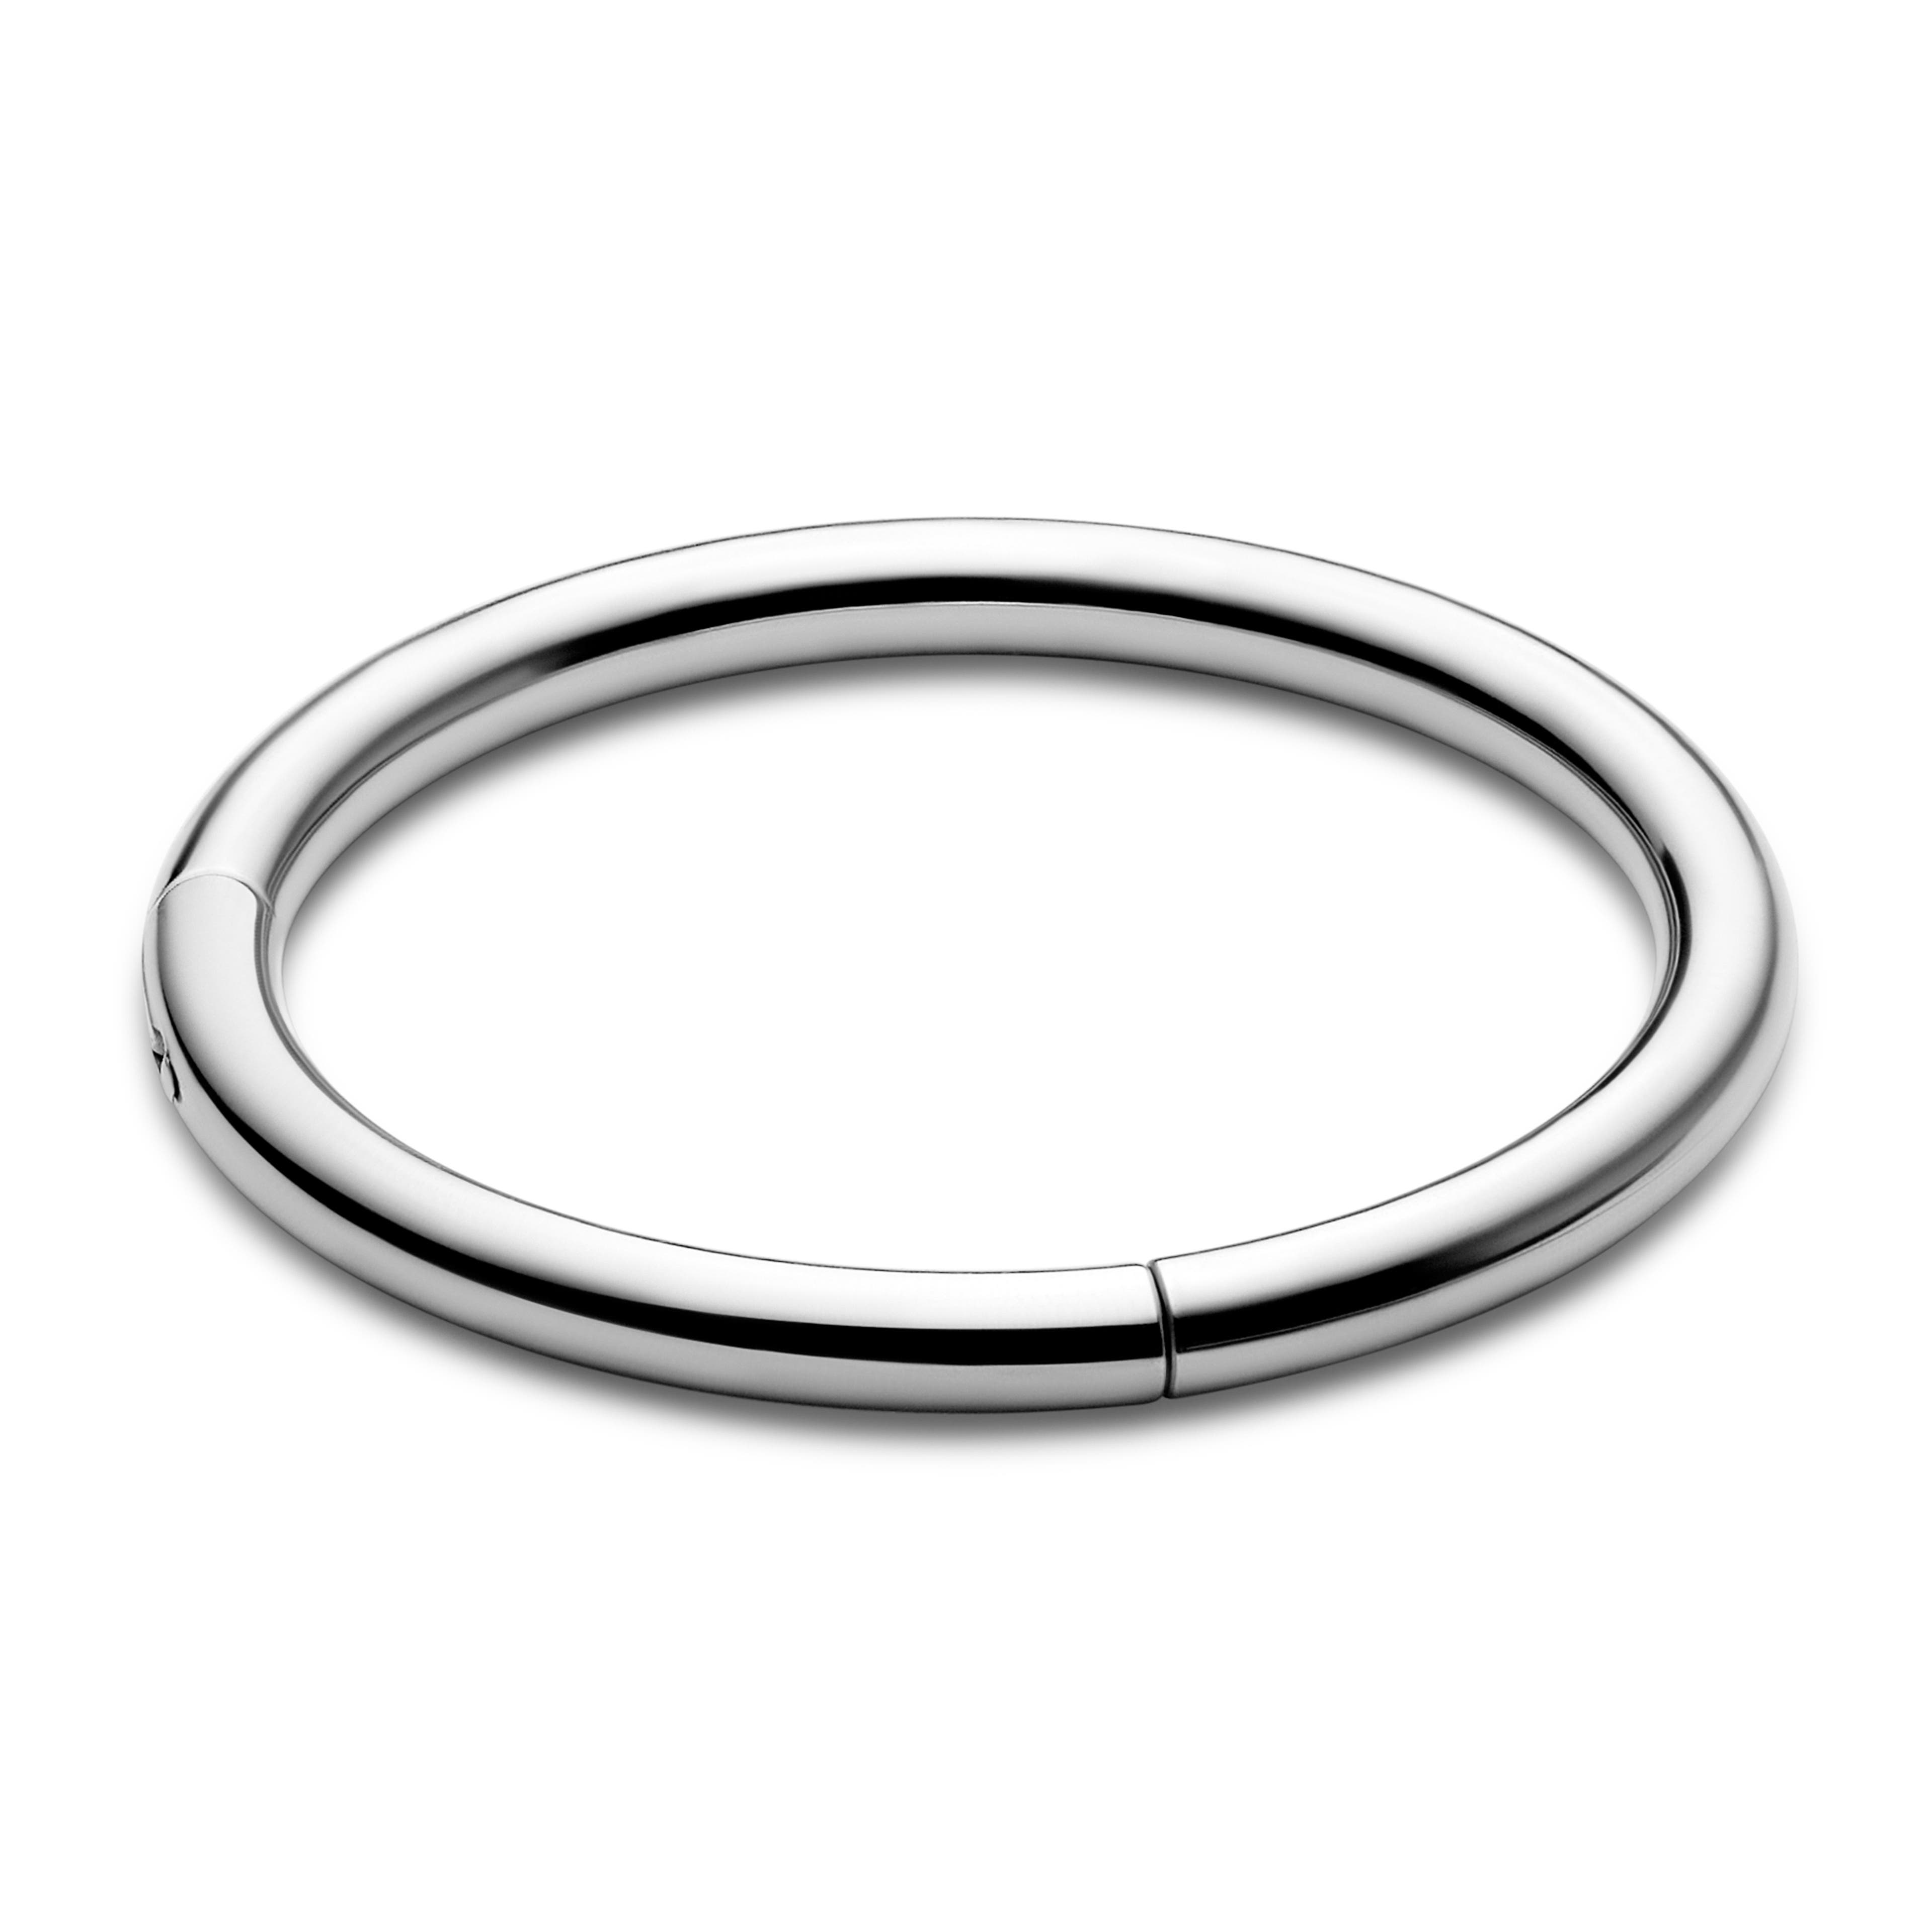 3/8" (10 mm) Silver-tone Surgical Steel Piercing Ring